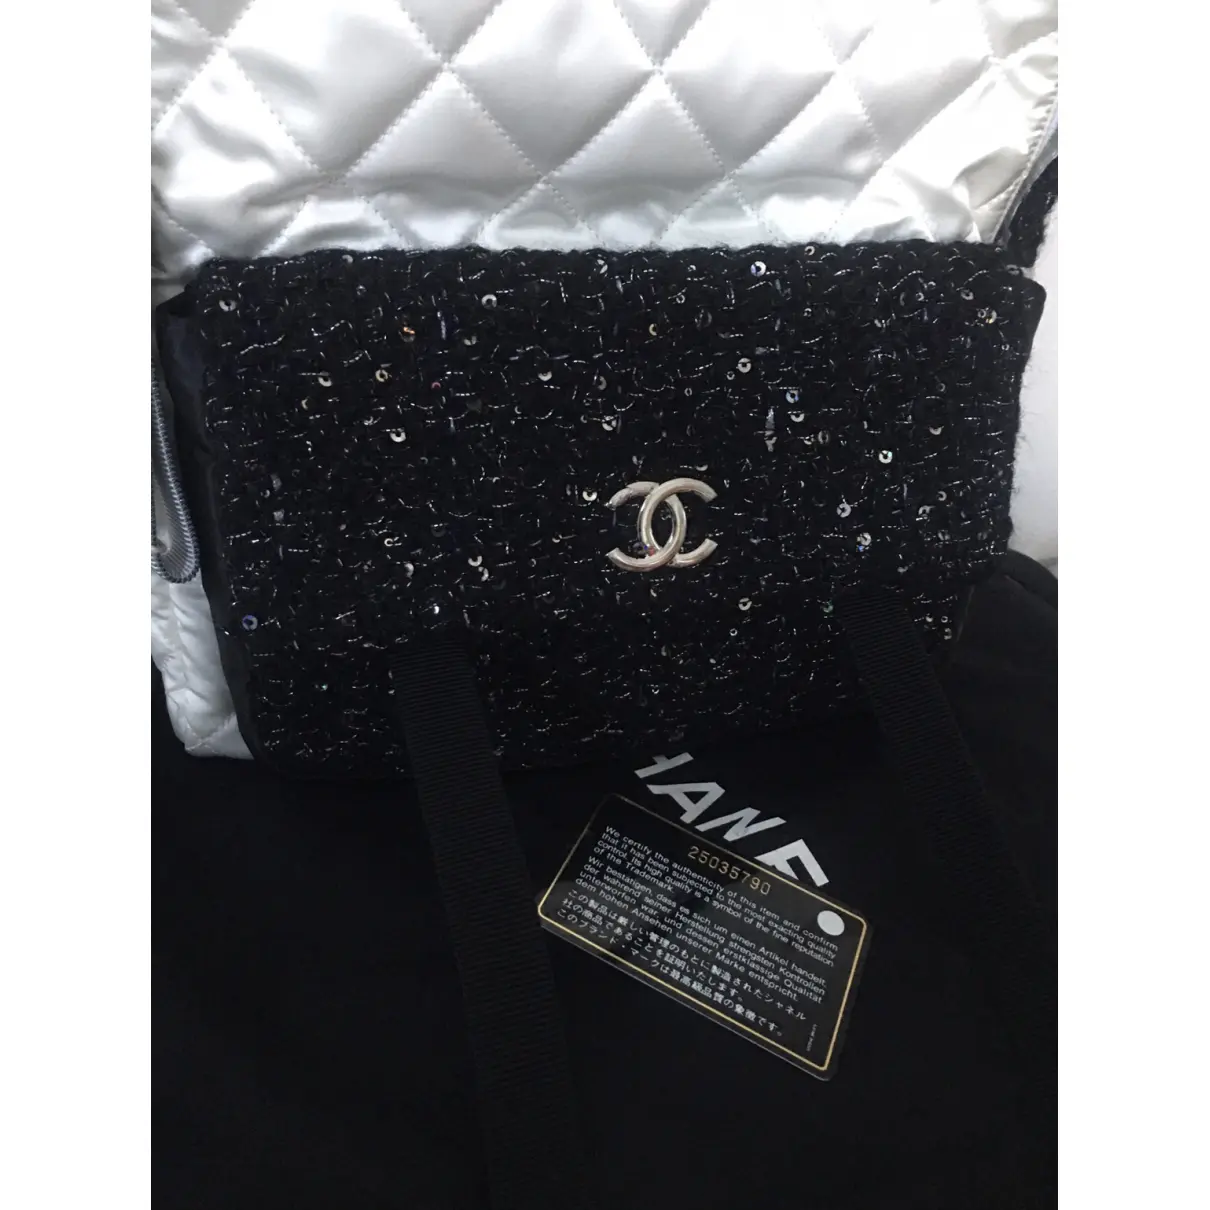 Buy Chanel Timeless/Classique Chain tweed backpack online